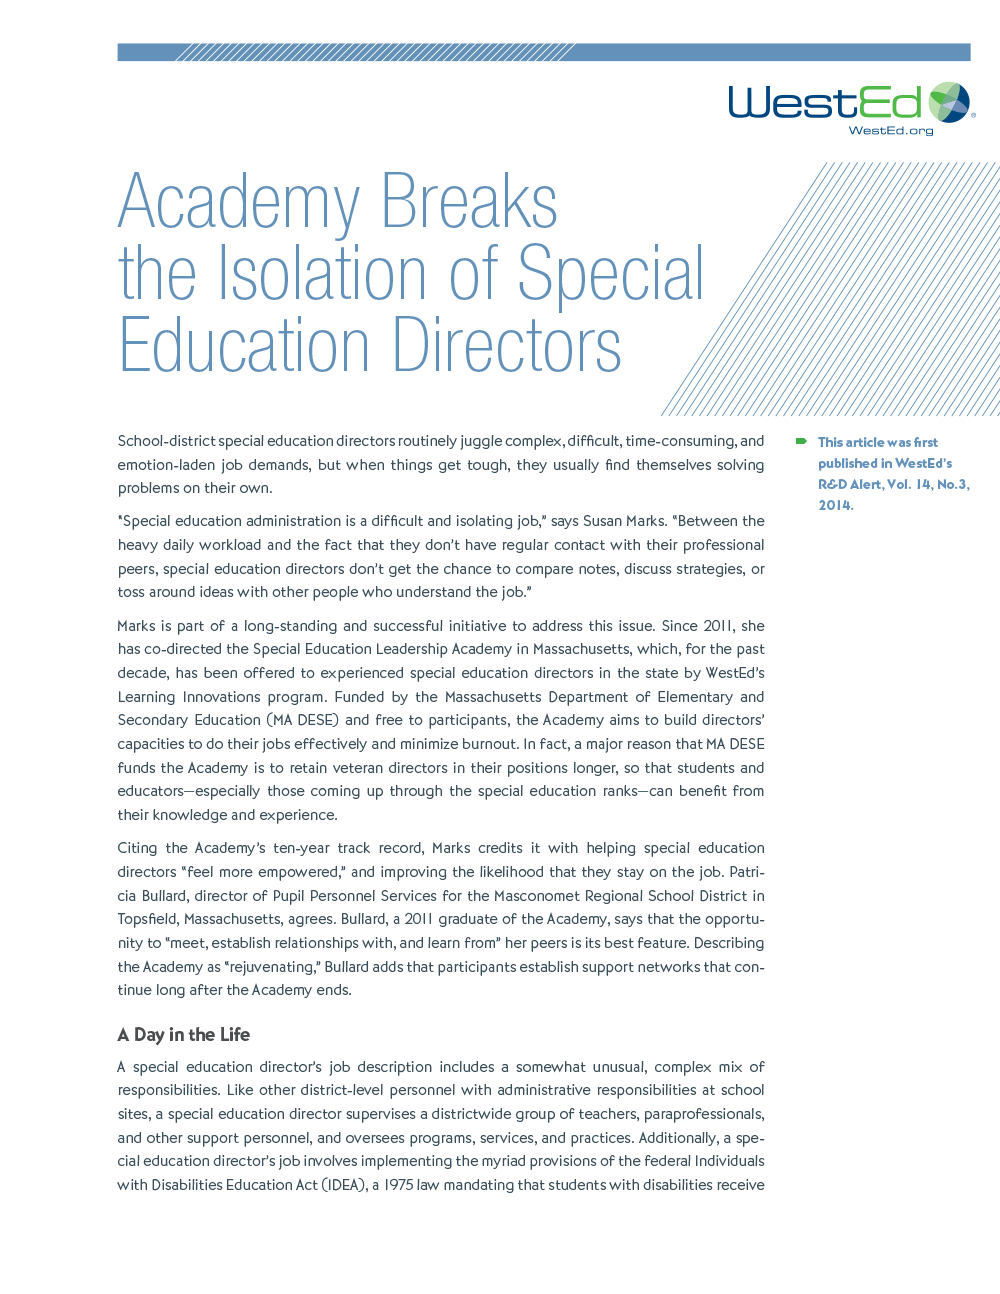 Cover image for article: Academy Breaks the Isolation of Special Education Directors